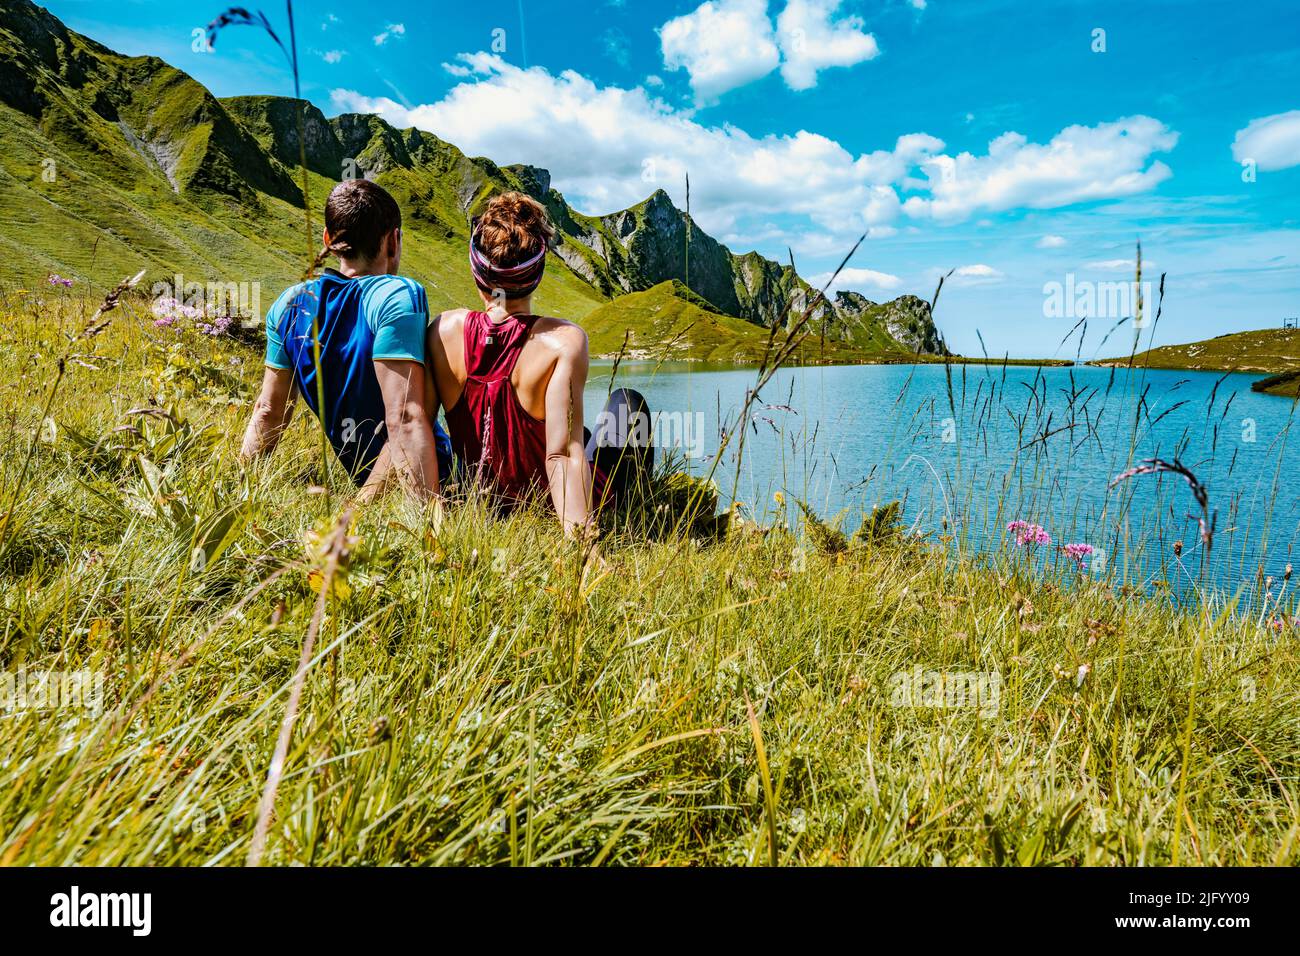 A scenic view of a Caucasian couple admiring the Schrecksee lake, sitting on green grass on a sunny day Stock Photo